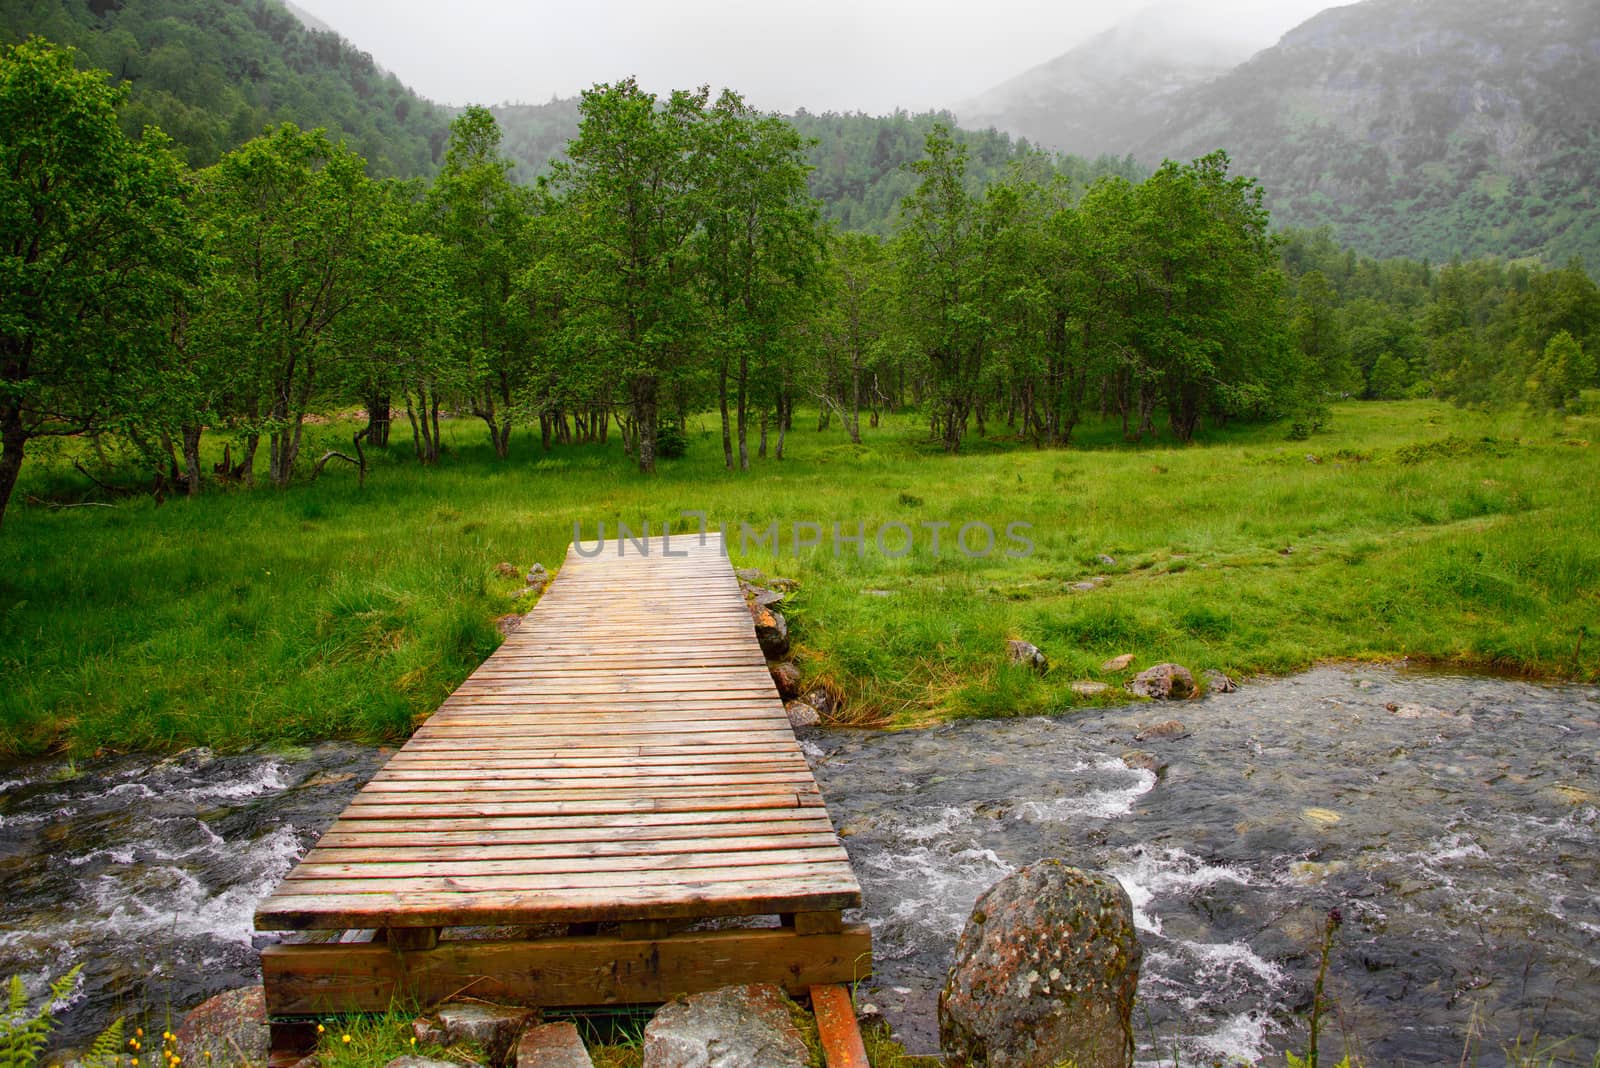 A simple wooden bridge crossing a river into the wilderness